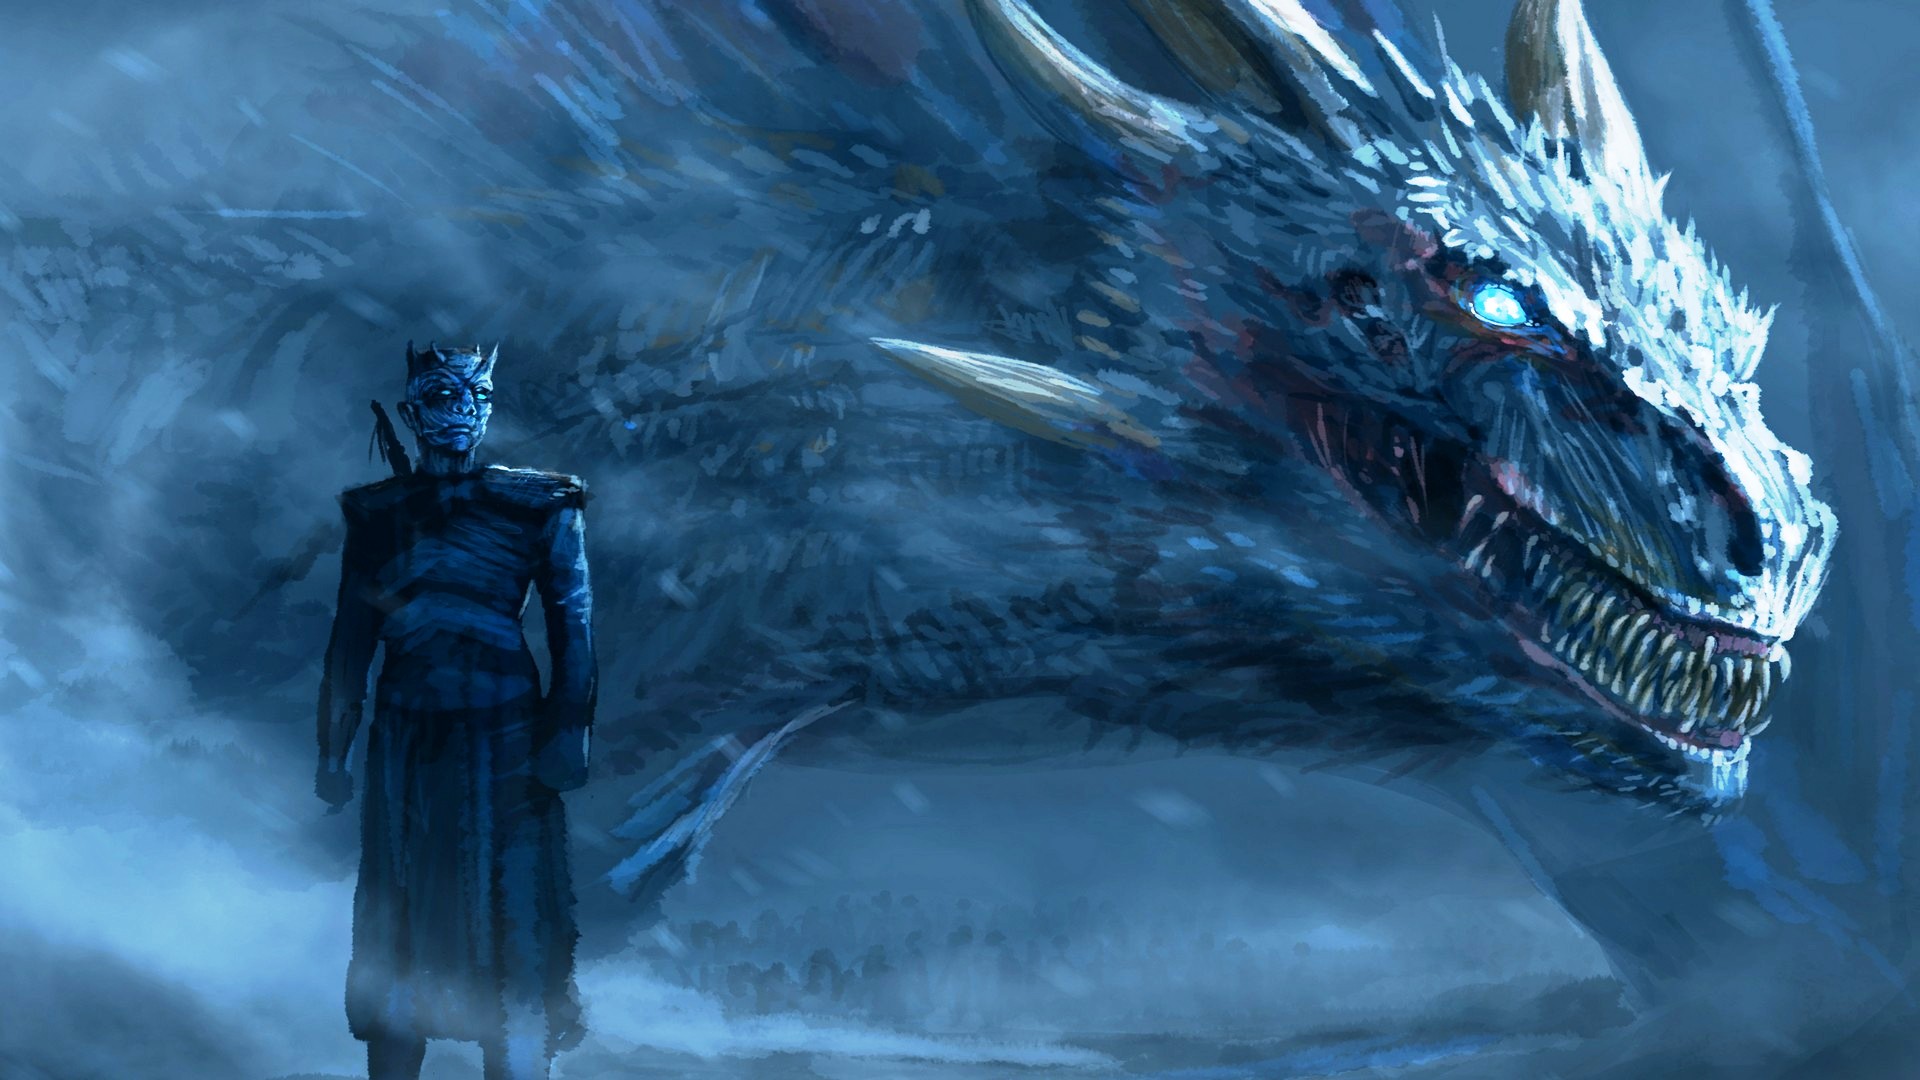 Game of Thrones Wallpaper HD with high-resolution 1920x1080 pixel. You can use this poster wallpaper for your Desktop Computers, Mac Screensavers, Windows Backgrounds, iPhone Wallpapers, Tablet or Android Lock screen and another Mobile device